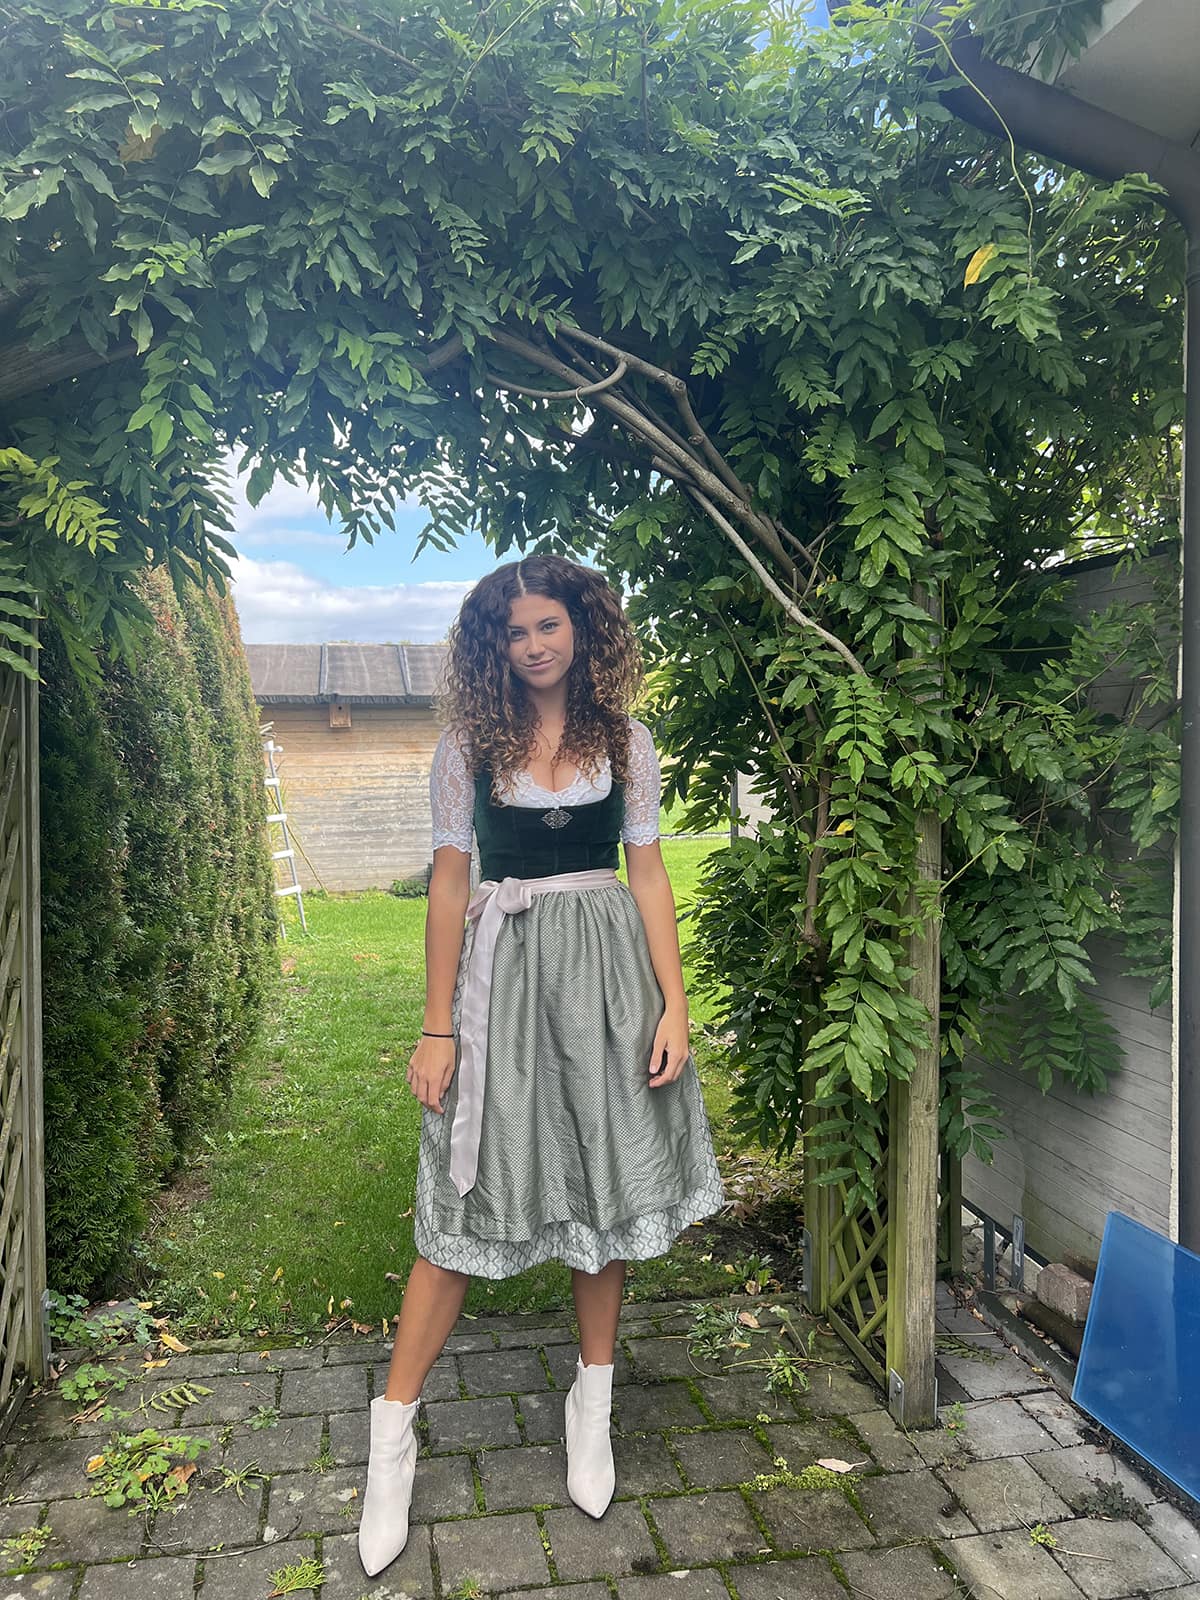 Julia poses in a green dress with a black bodice and white ankle boots, under an archway covered in green vines.